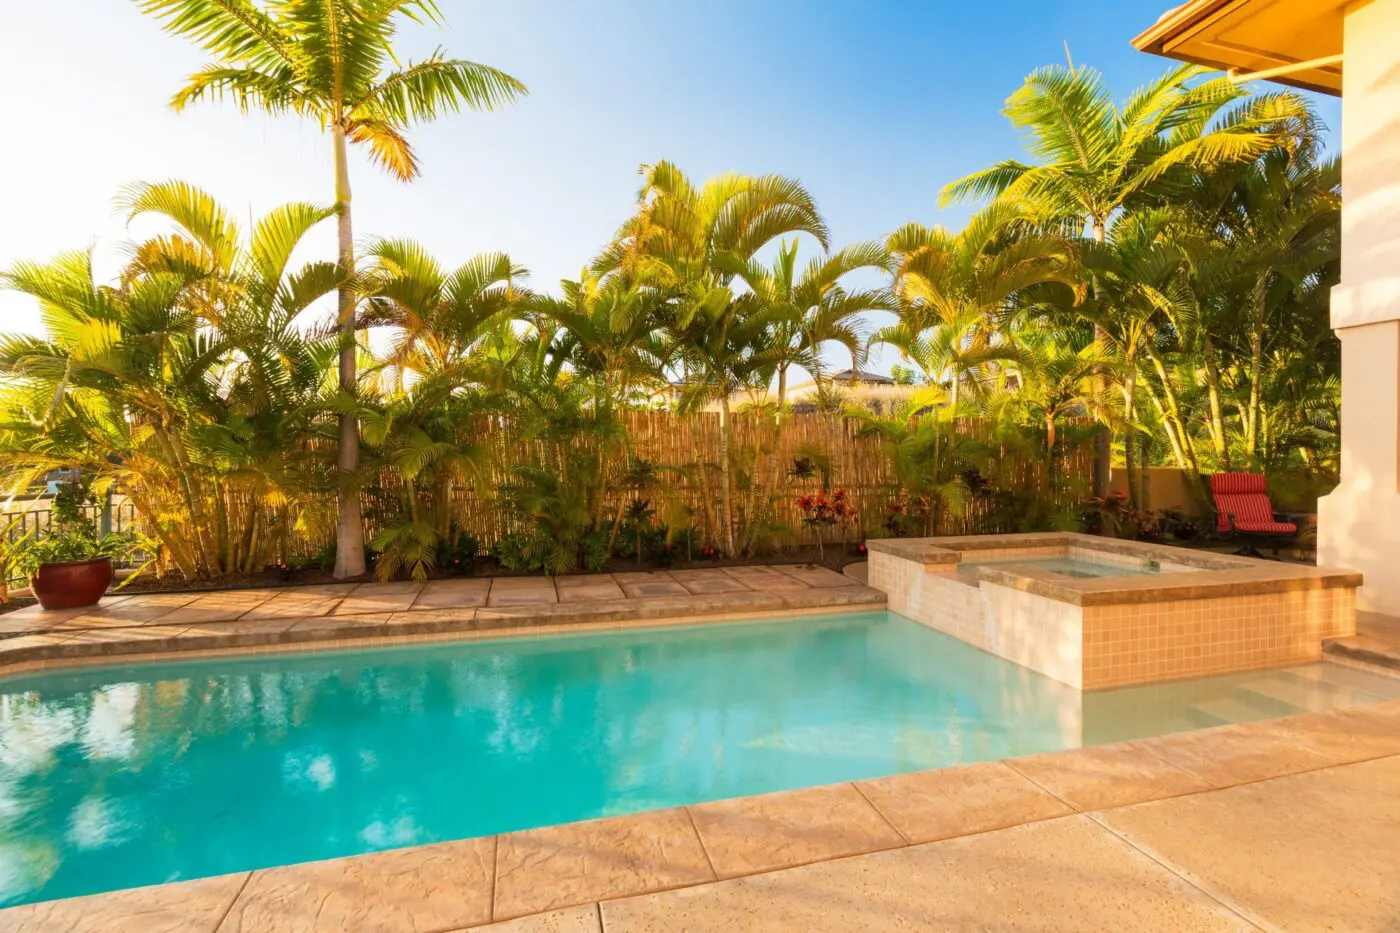 A serene backyard pool area with crystal clear water, surrounded by tall palm trees and lush greenery in Weston, FL. Adjacent to the pool is a raised hot tub. The setting is tranquil under a clear, blue sky with a warm and inviting atmosphere. Contact us for concrete services or a free quote today!